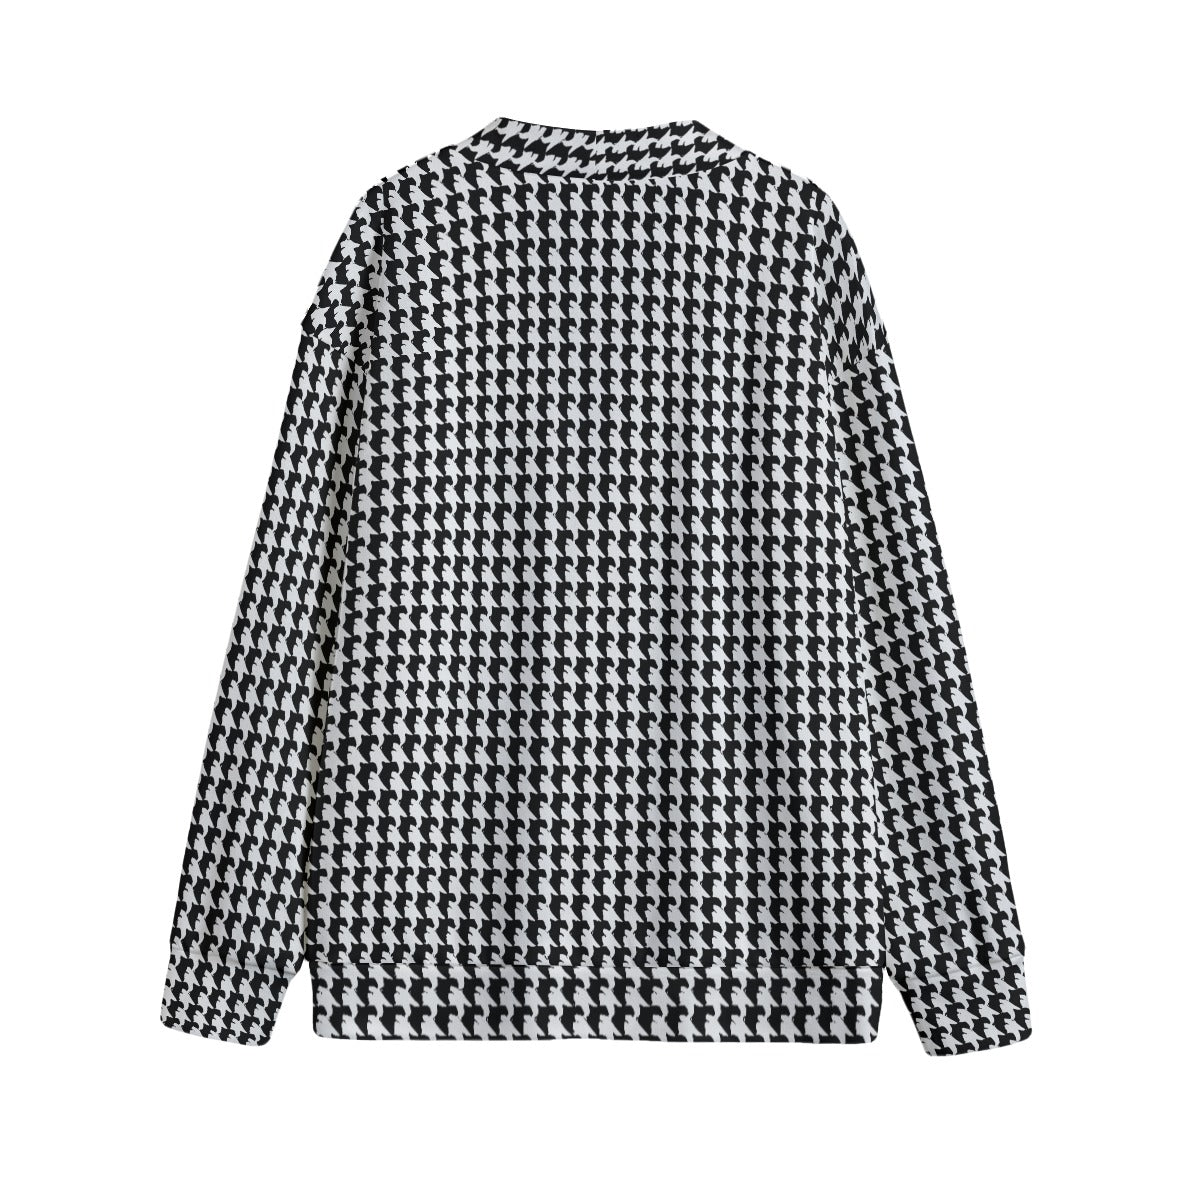 Vampire Art Retro Houndstooth in Black & White Unisex V-neck Knitted Fleece Cardigan With Buttons